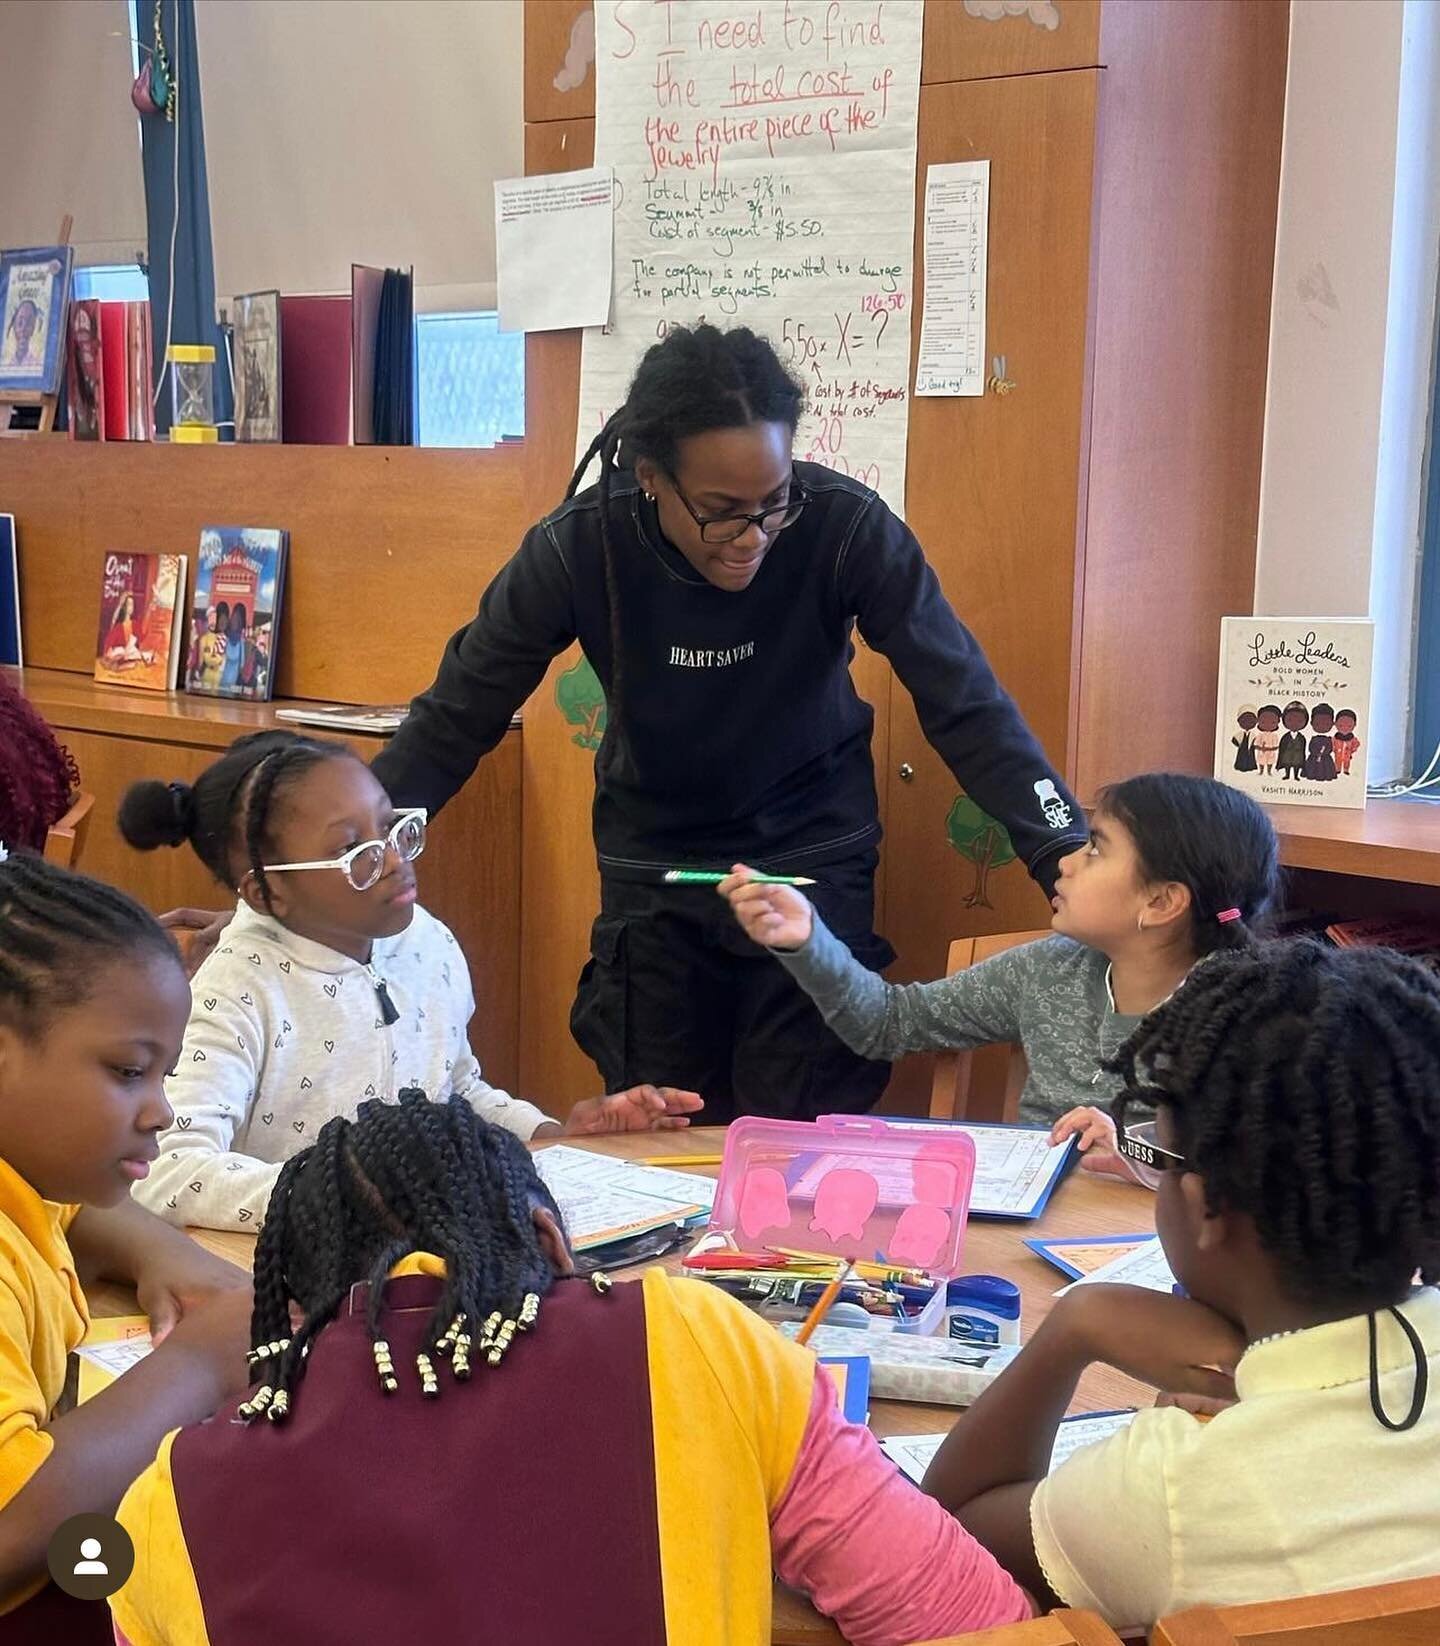 Recently we&rsquo;ve had the opportunity to engage in Financial Literacy workshops at P.S. 208. It was a pleasure working with such a unique and passionate community of staff and scholars. We look forward to the success stories that will come from th